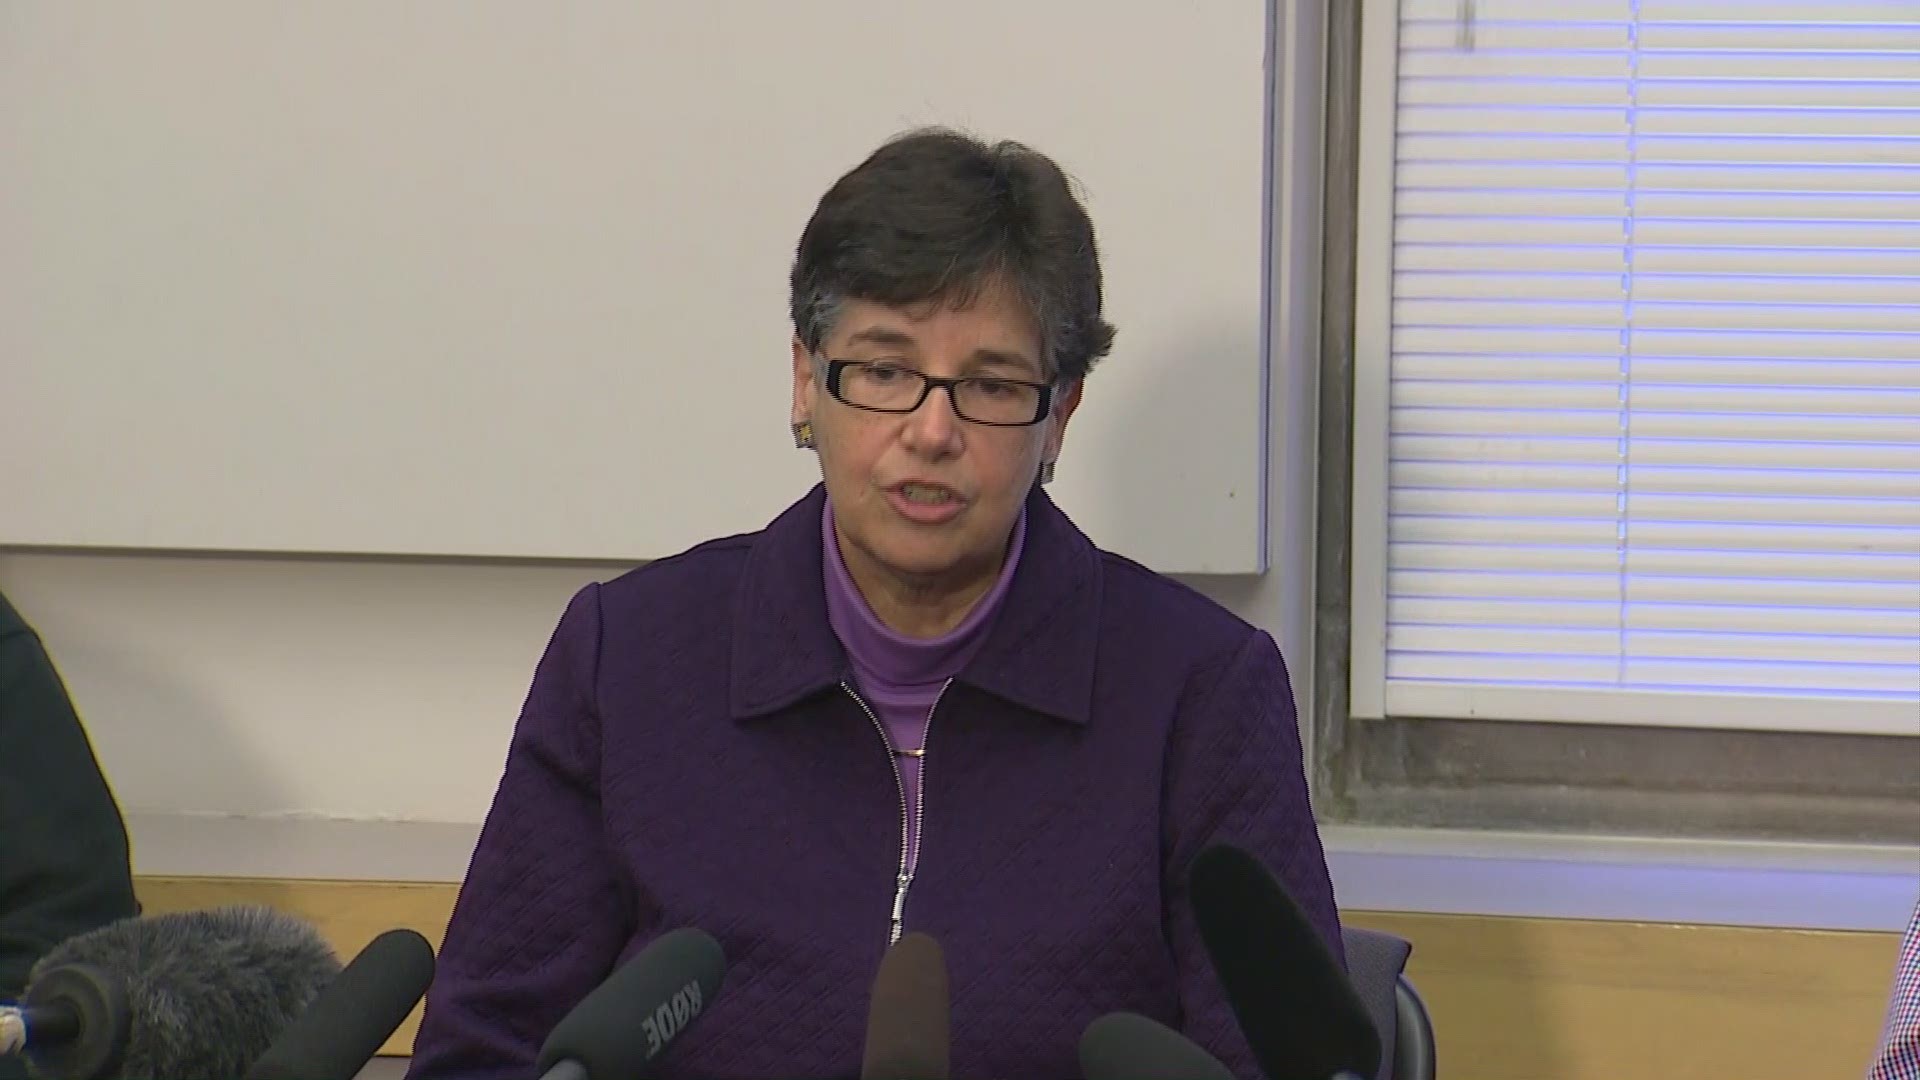 UW President Ana Mari Cauce talks about closing the main UW campus through the end of the quarter, March 20.